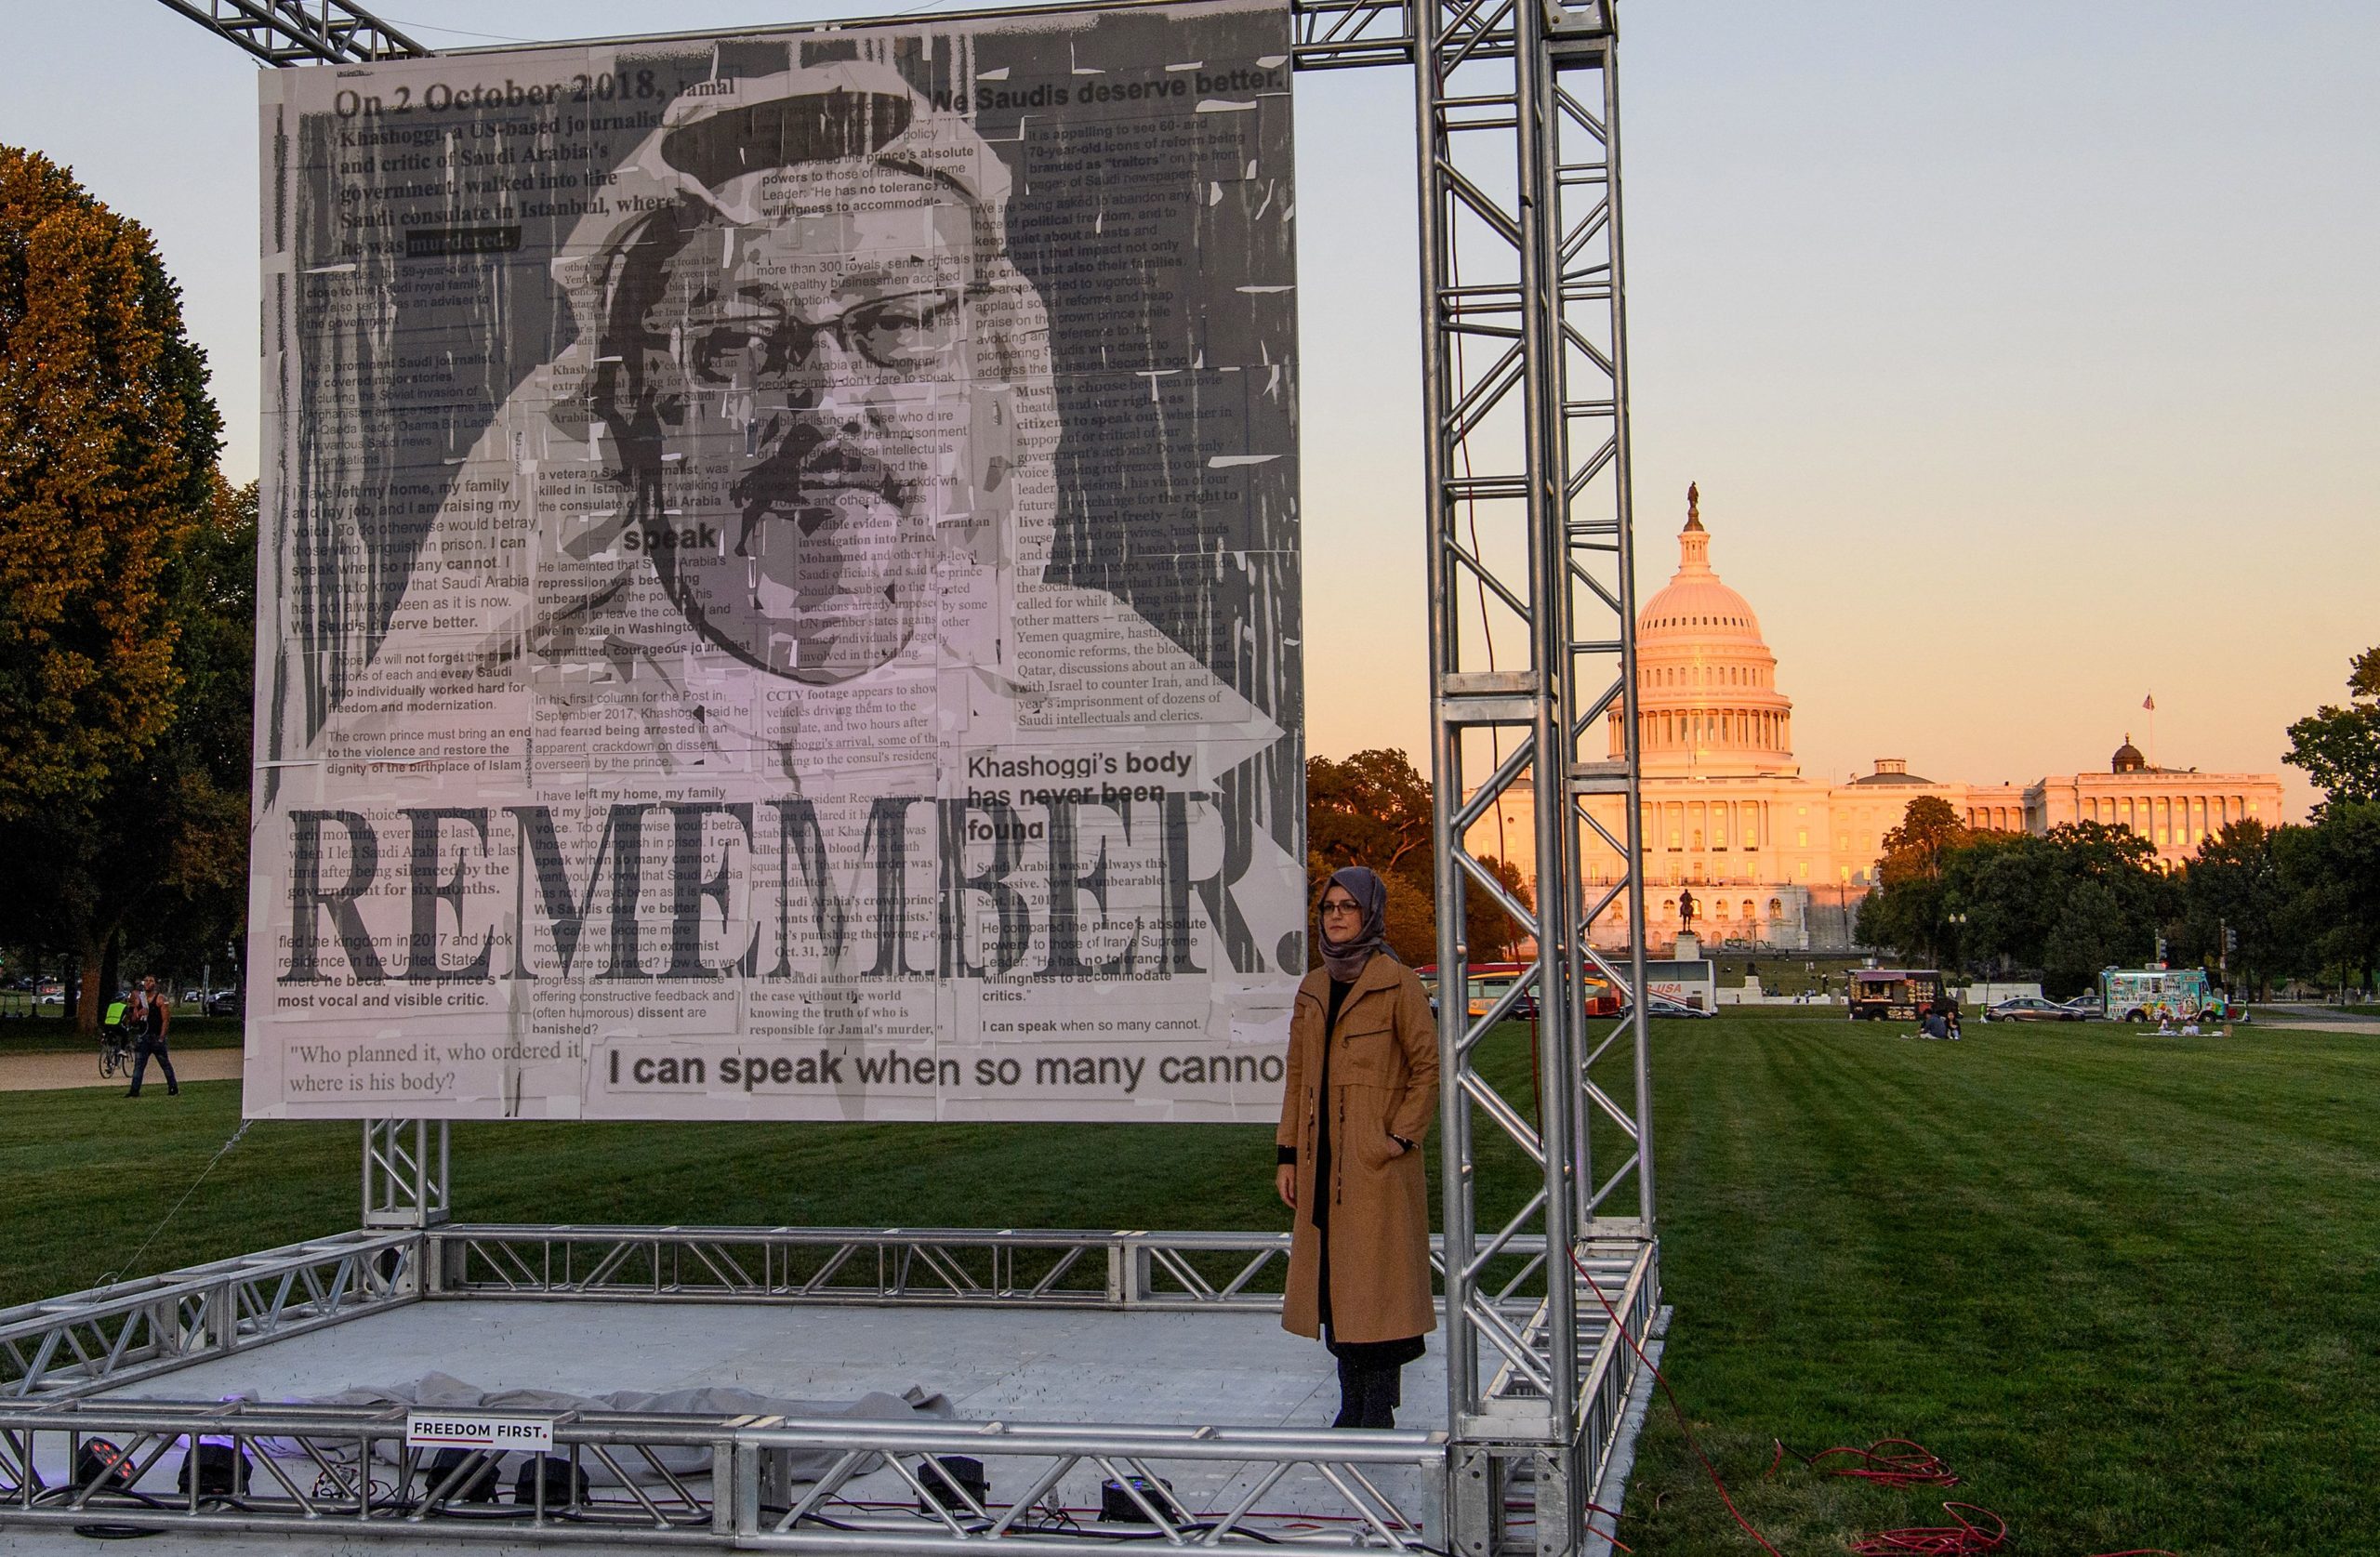 Turkish writer Hatice Cengiz (R), fiancée of Saudi journalist and dissident Jamal Khashoggi, poses next to a portrait of Khashoggi after unveiling it on the National Mall in Washington, DC., on October 1, 2021, during a memorial ceremony marking the third anniversary of his murder at the Saudi consulate in Istanbul.